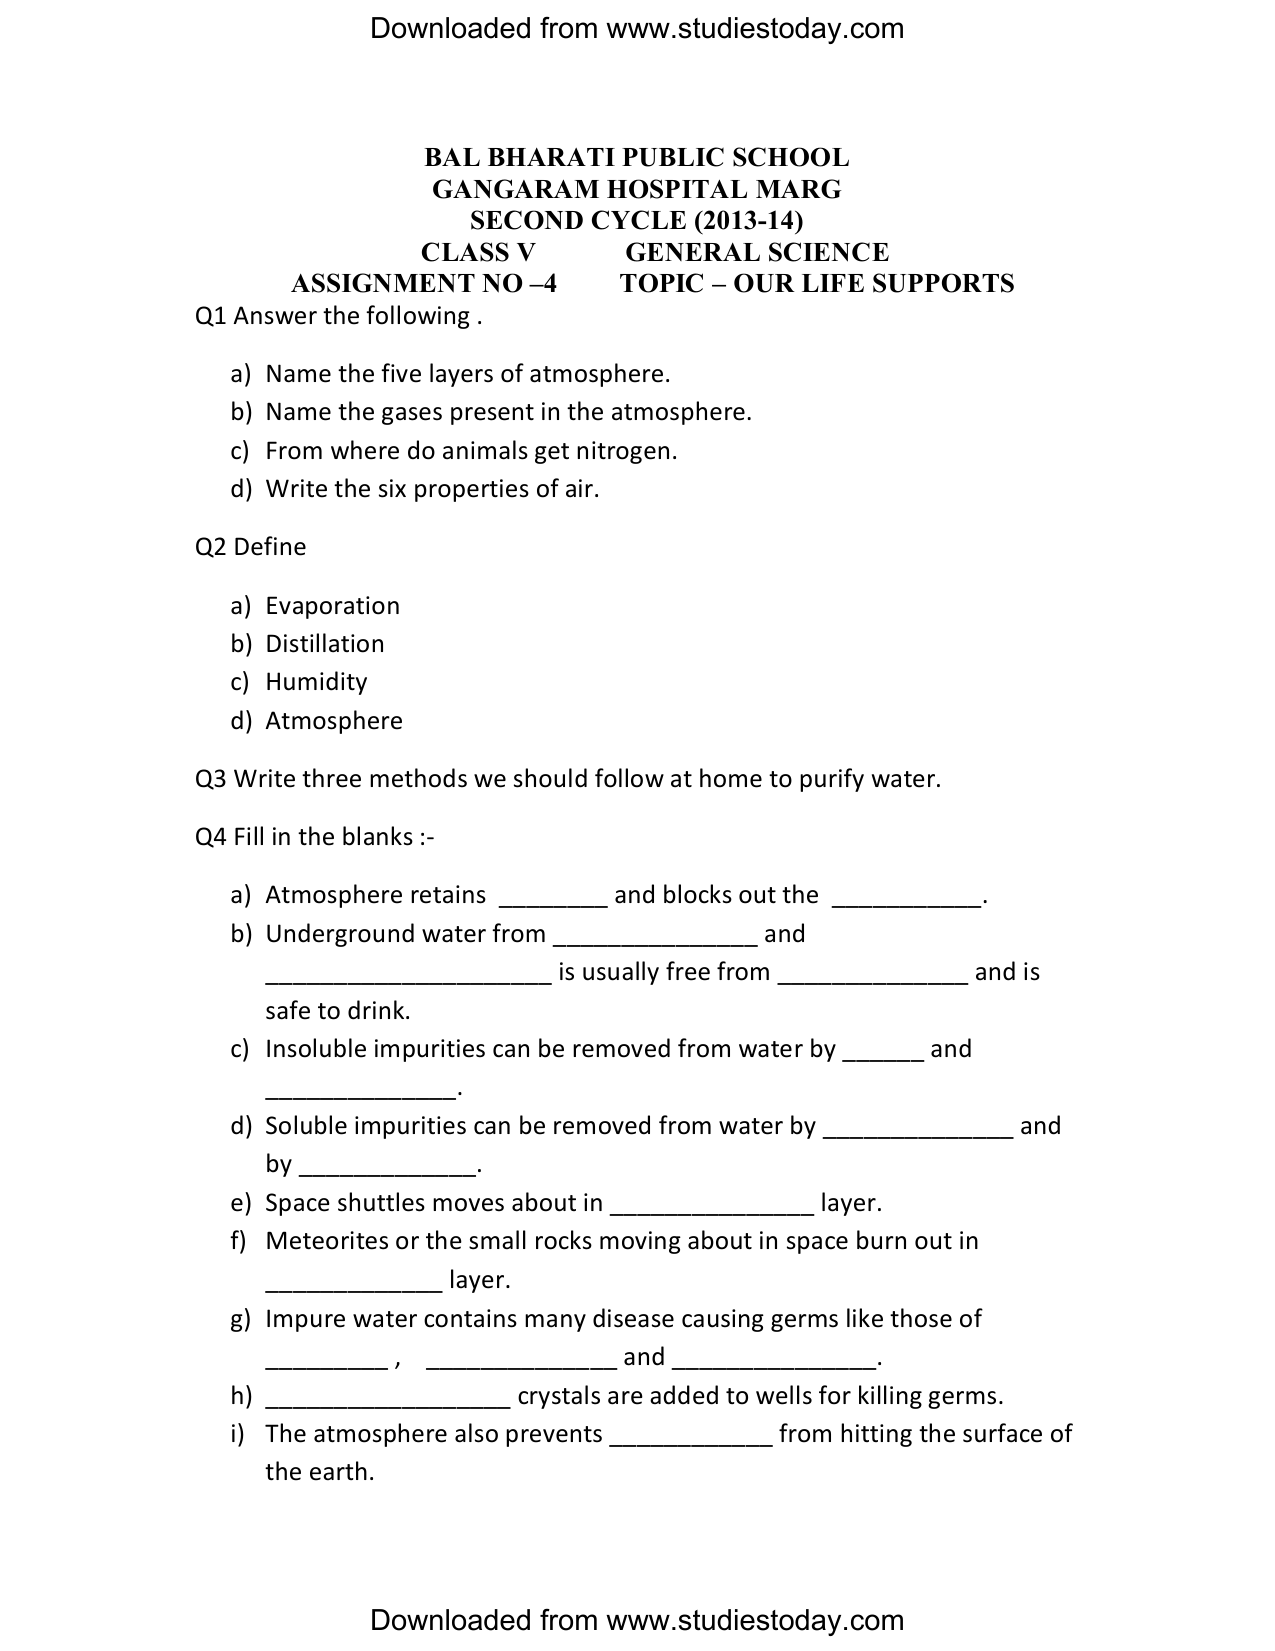 cbse-class-5-science-worksheets-4